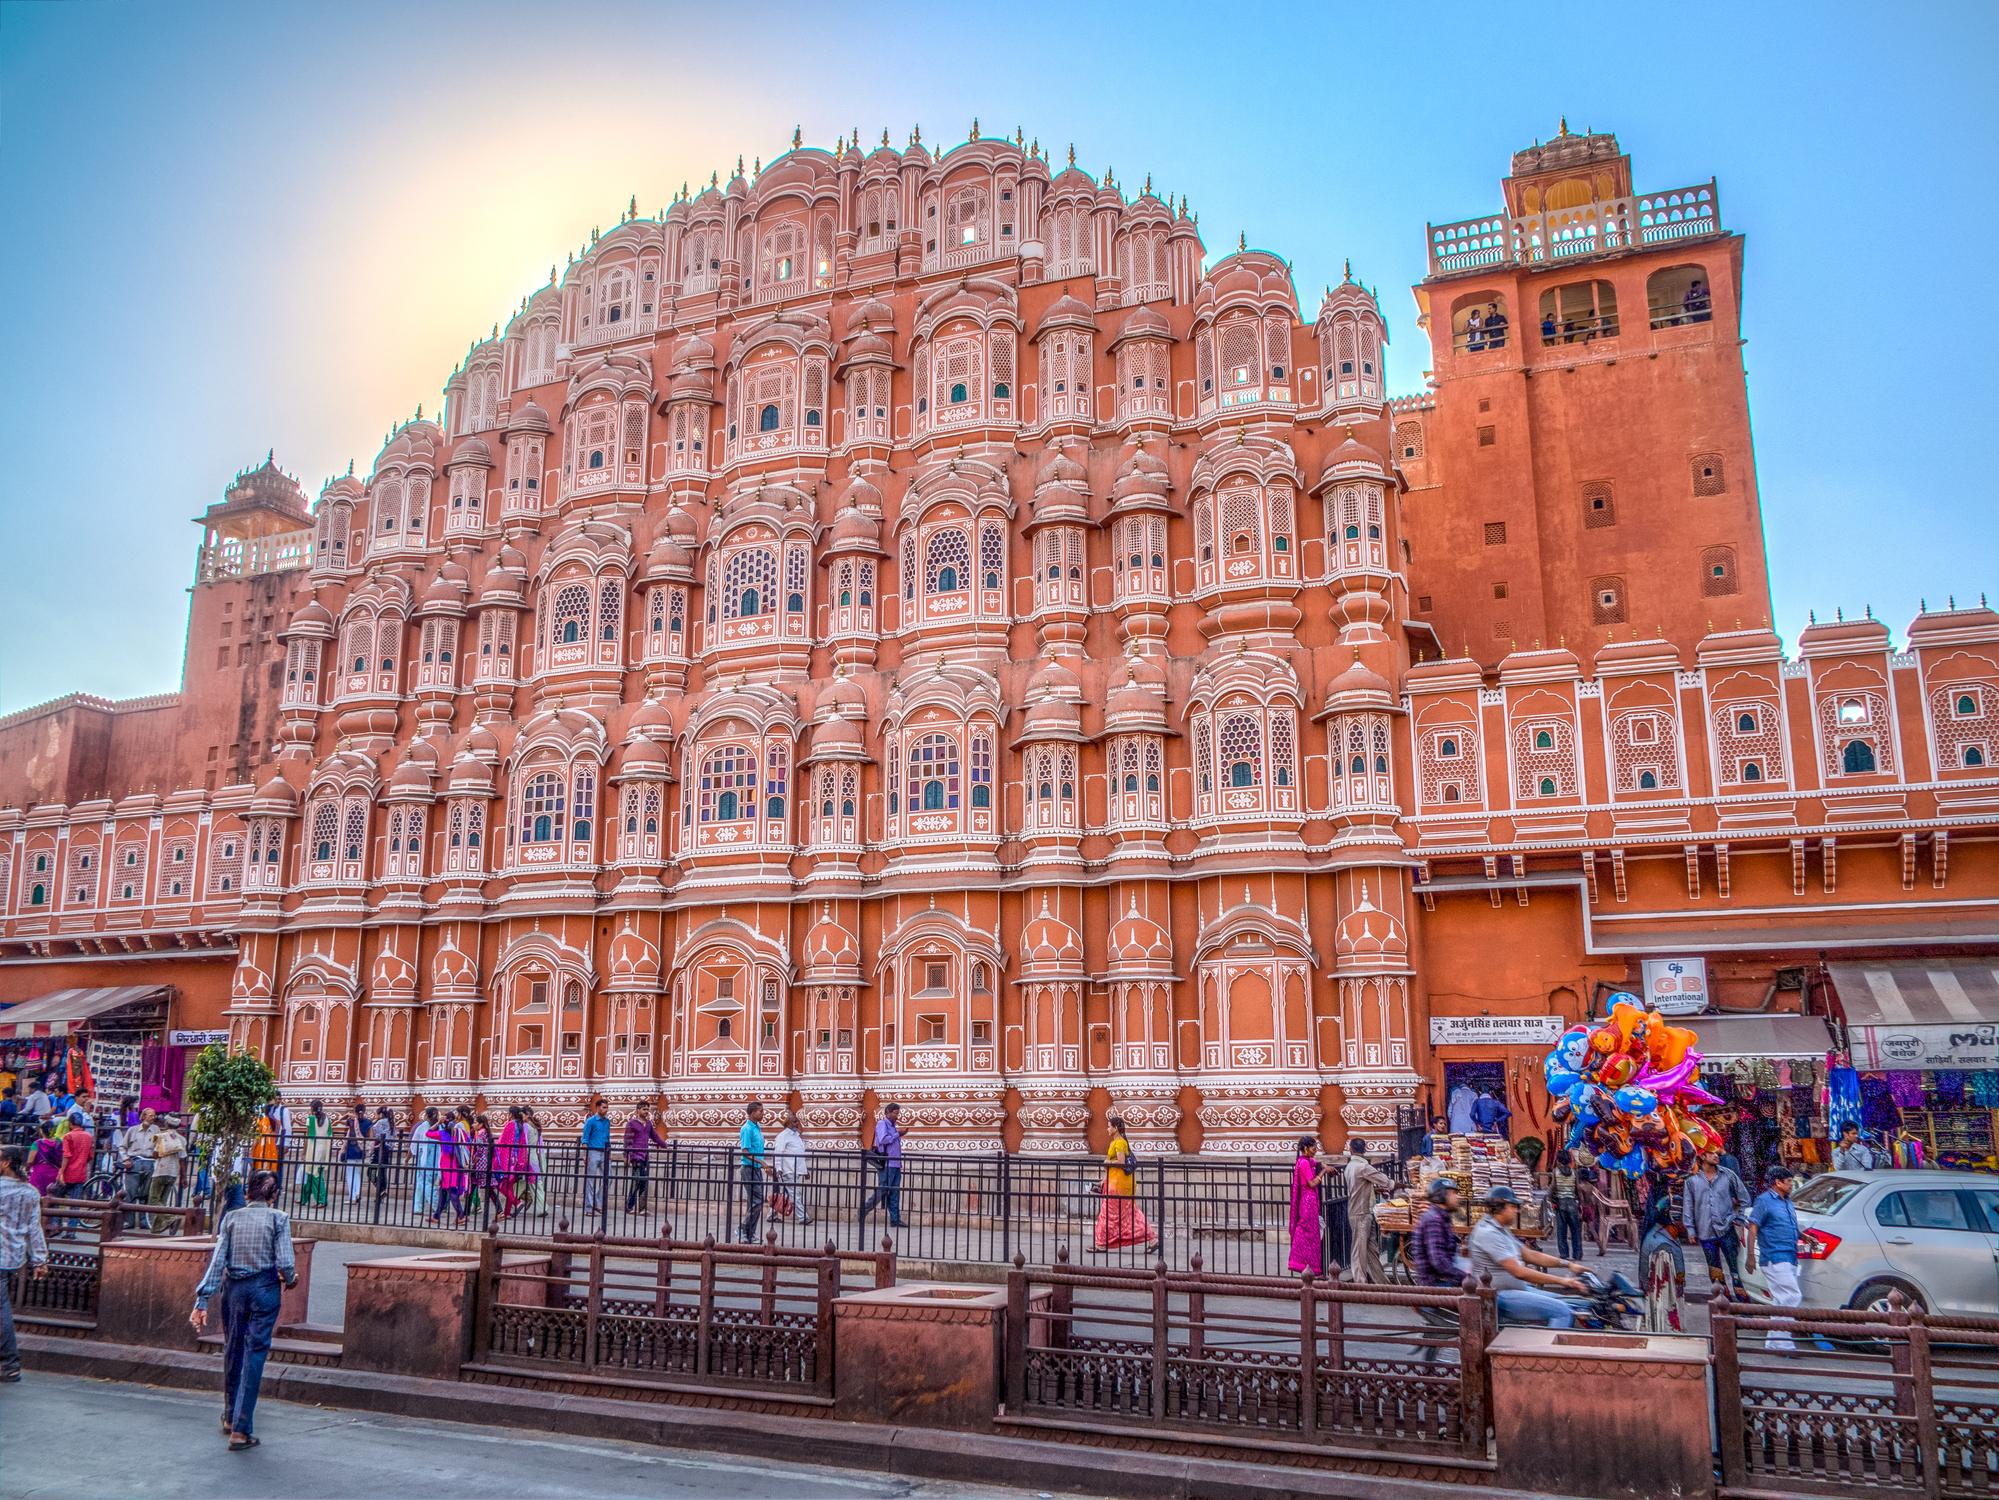 The Hawa Mahal, the palace of the wind, is Jaipur's most popular sight. From the many windows the royal family could observe the street. Photo: Getty